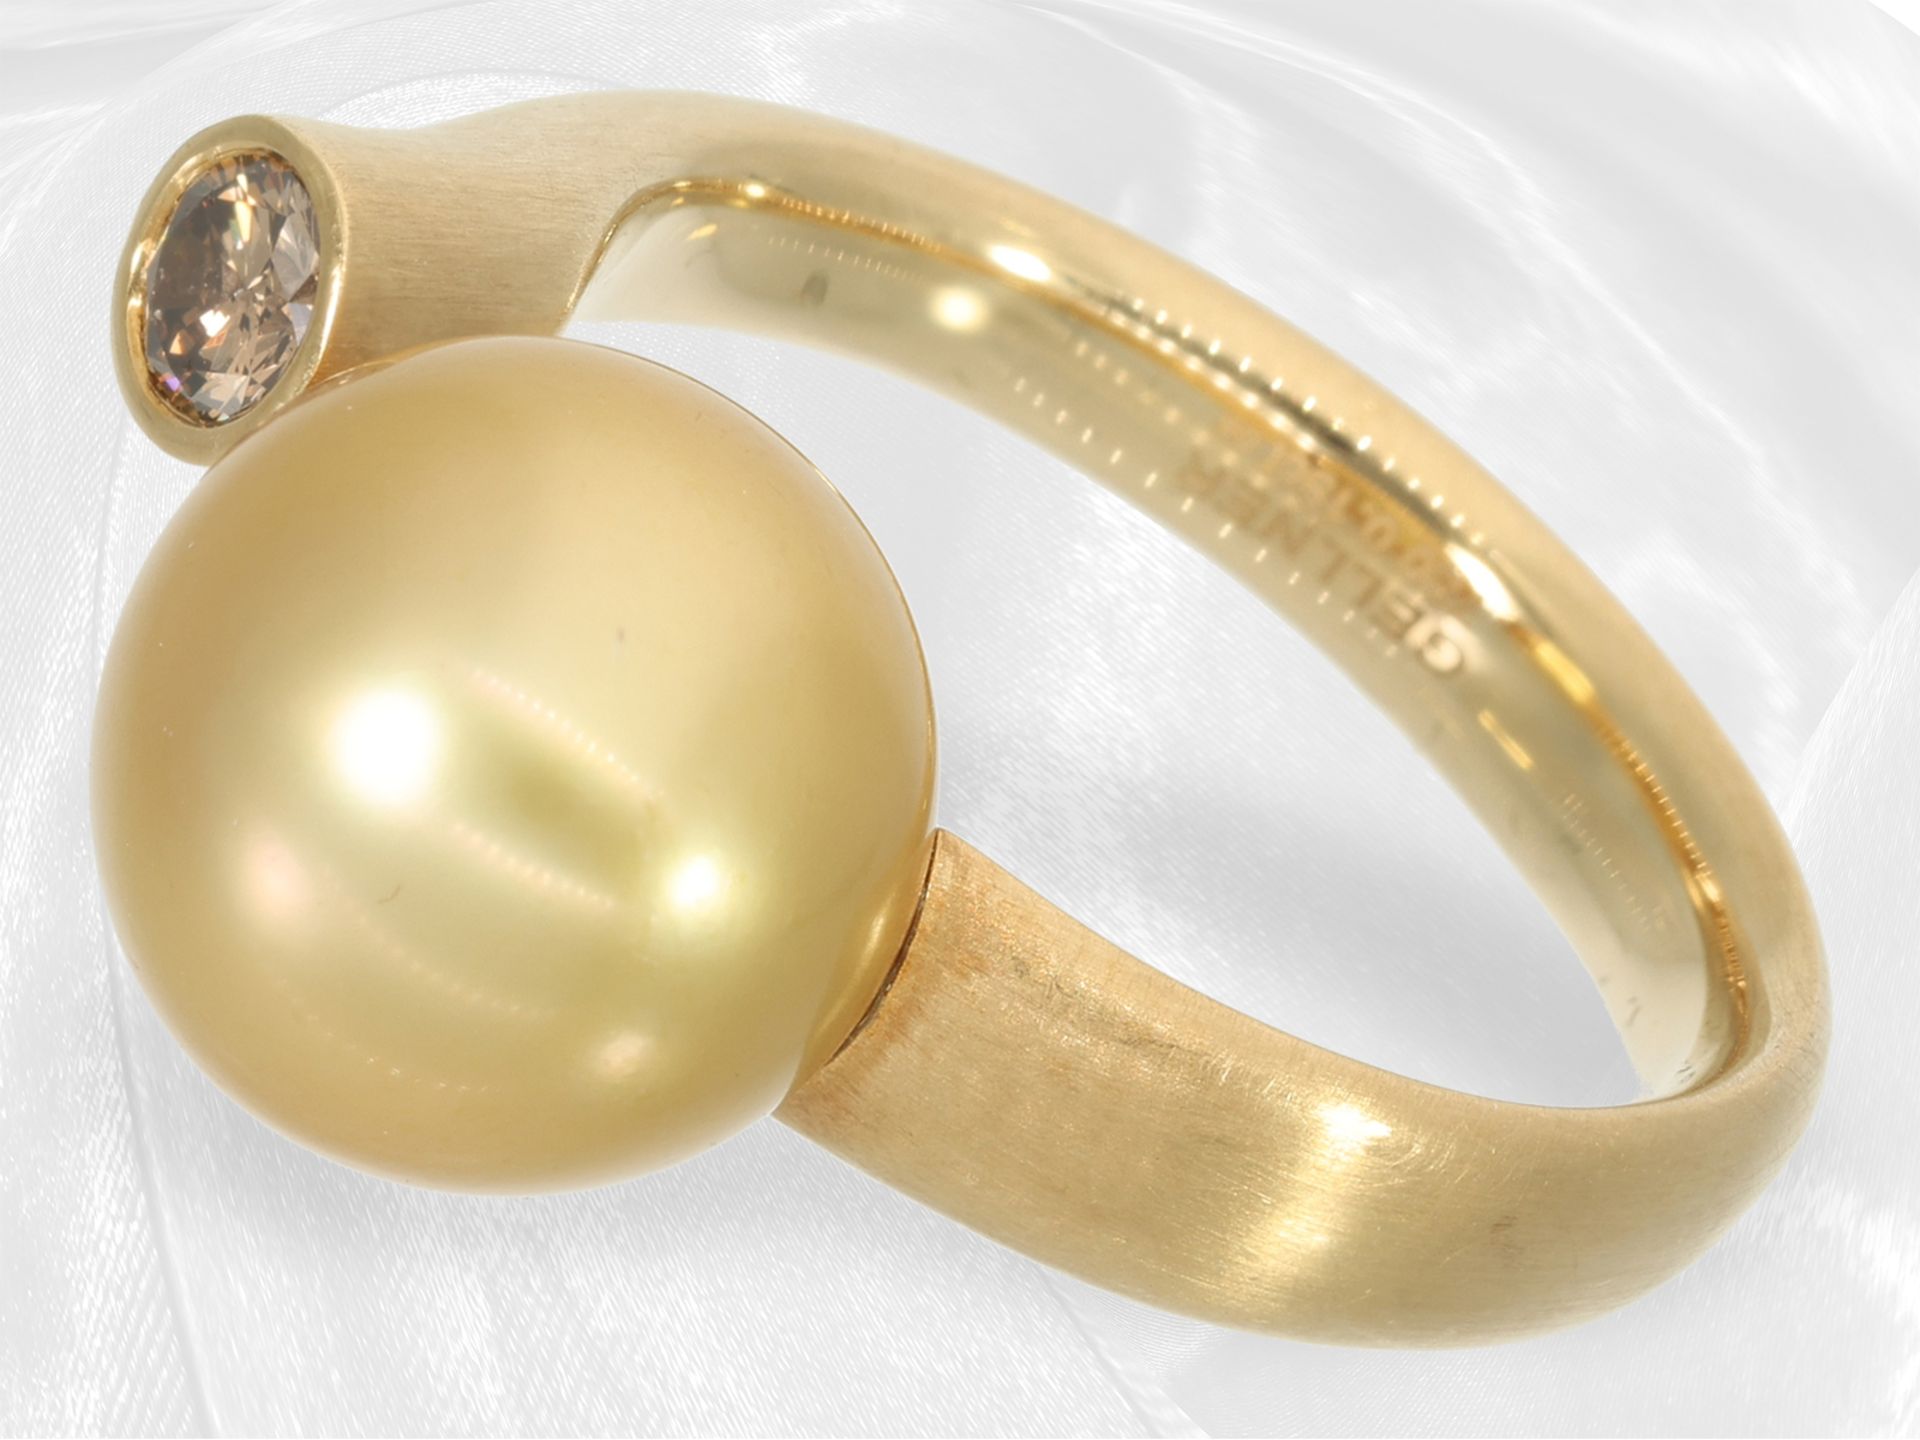 Elaborately crafted, high-quality designer ladies' ring with finest South Sea pearl and fancy diamon - Image 8 of 10